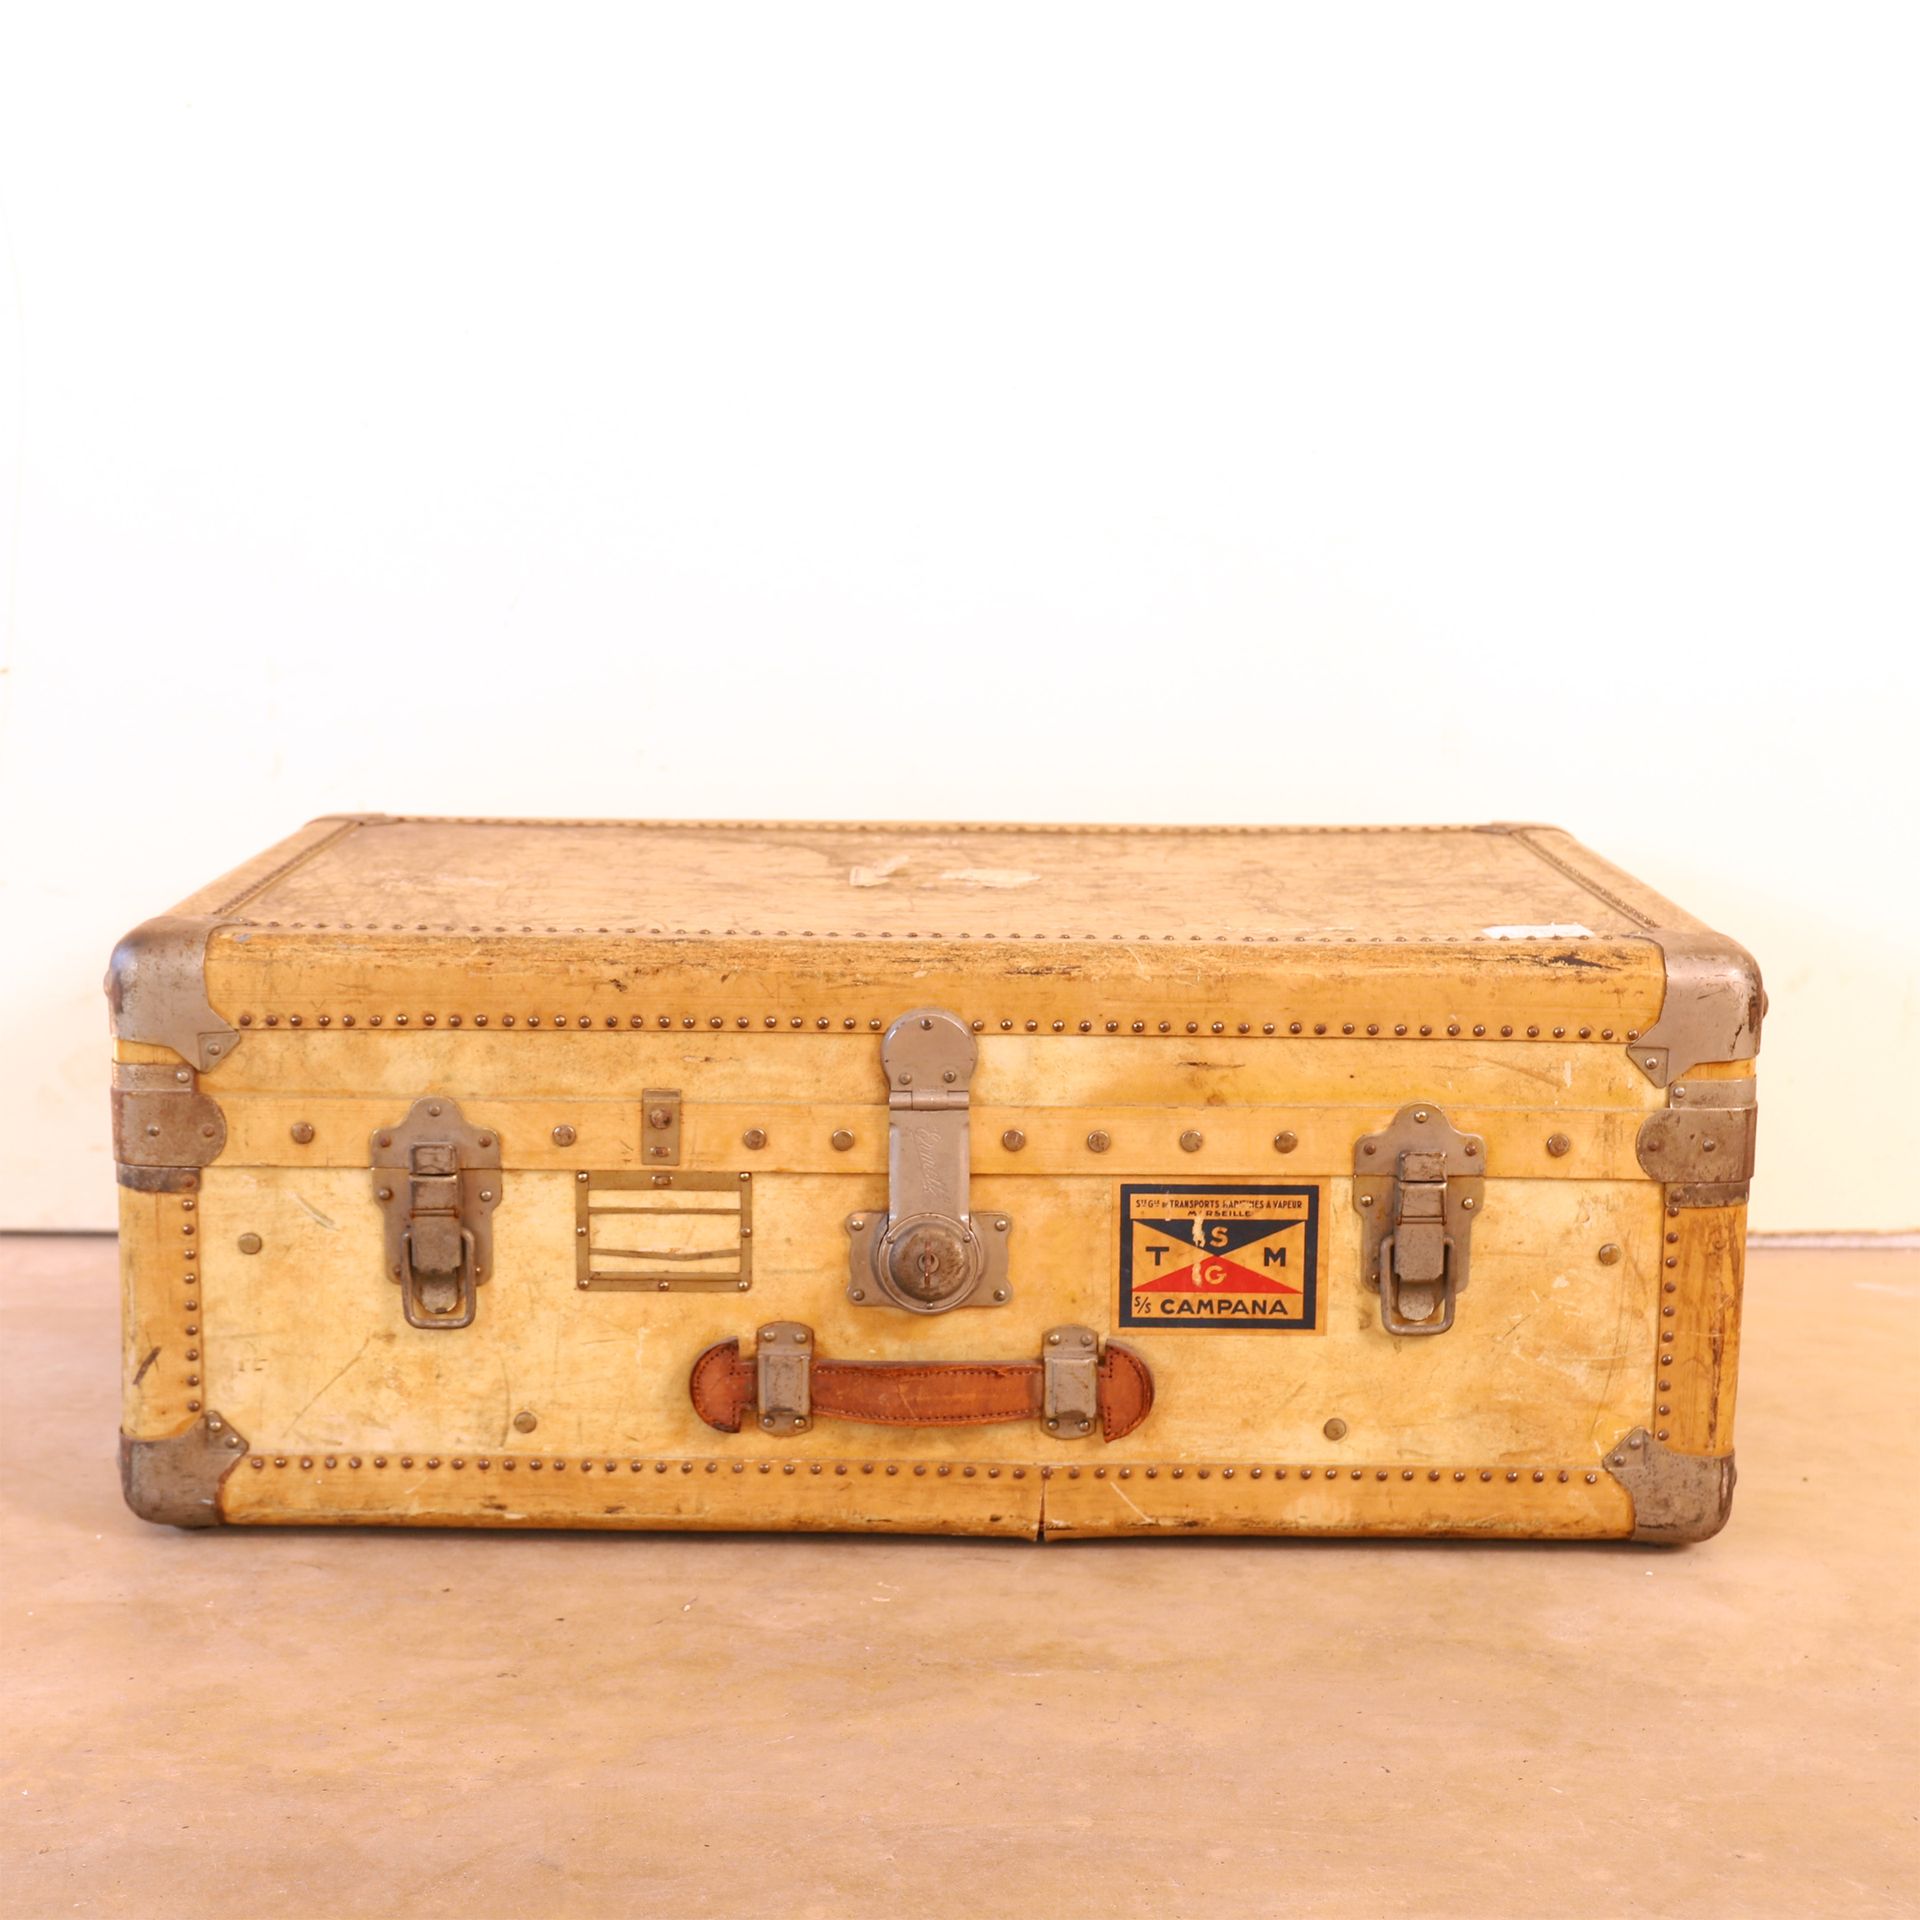 Null TRAVEL CASE by ERNETT

Leather, wood, hardware, three leather handles

Sign&hellip;